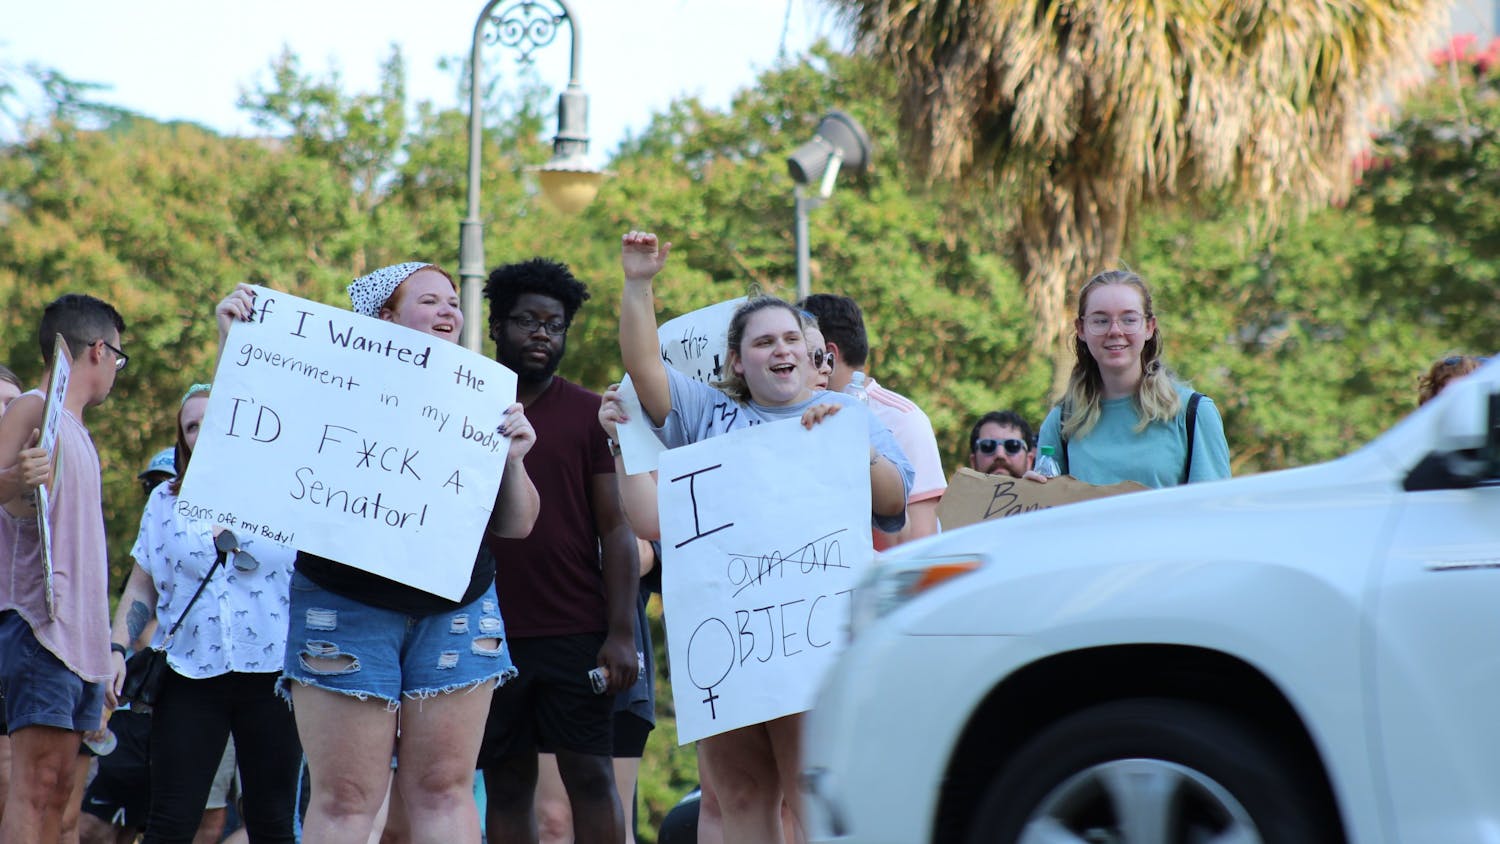 Demonstrators cheer and hold signs in front of the Statehouse on June 24, 2022. The protest comes after the Supreme Court ruled to overturn Roe v. Wade.&nbsp;